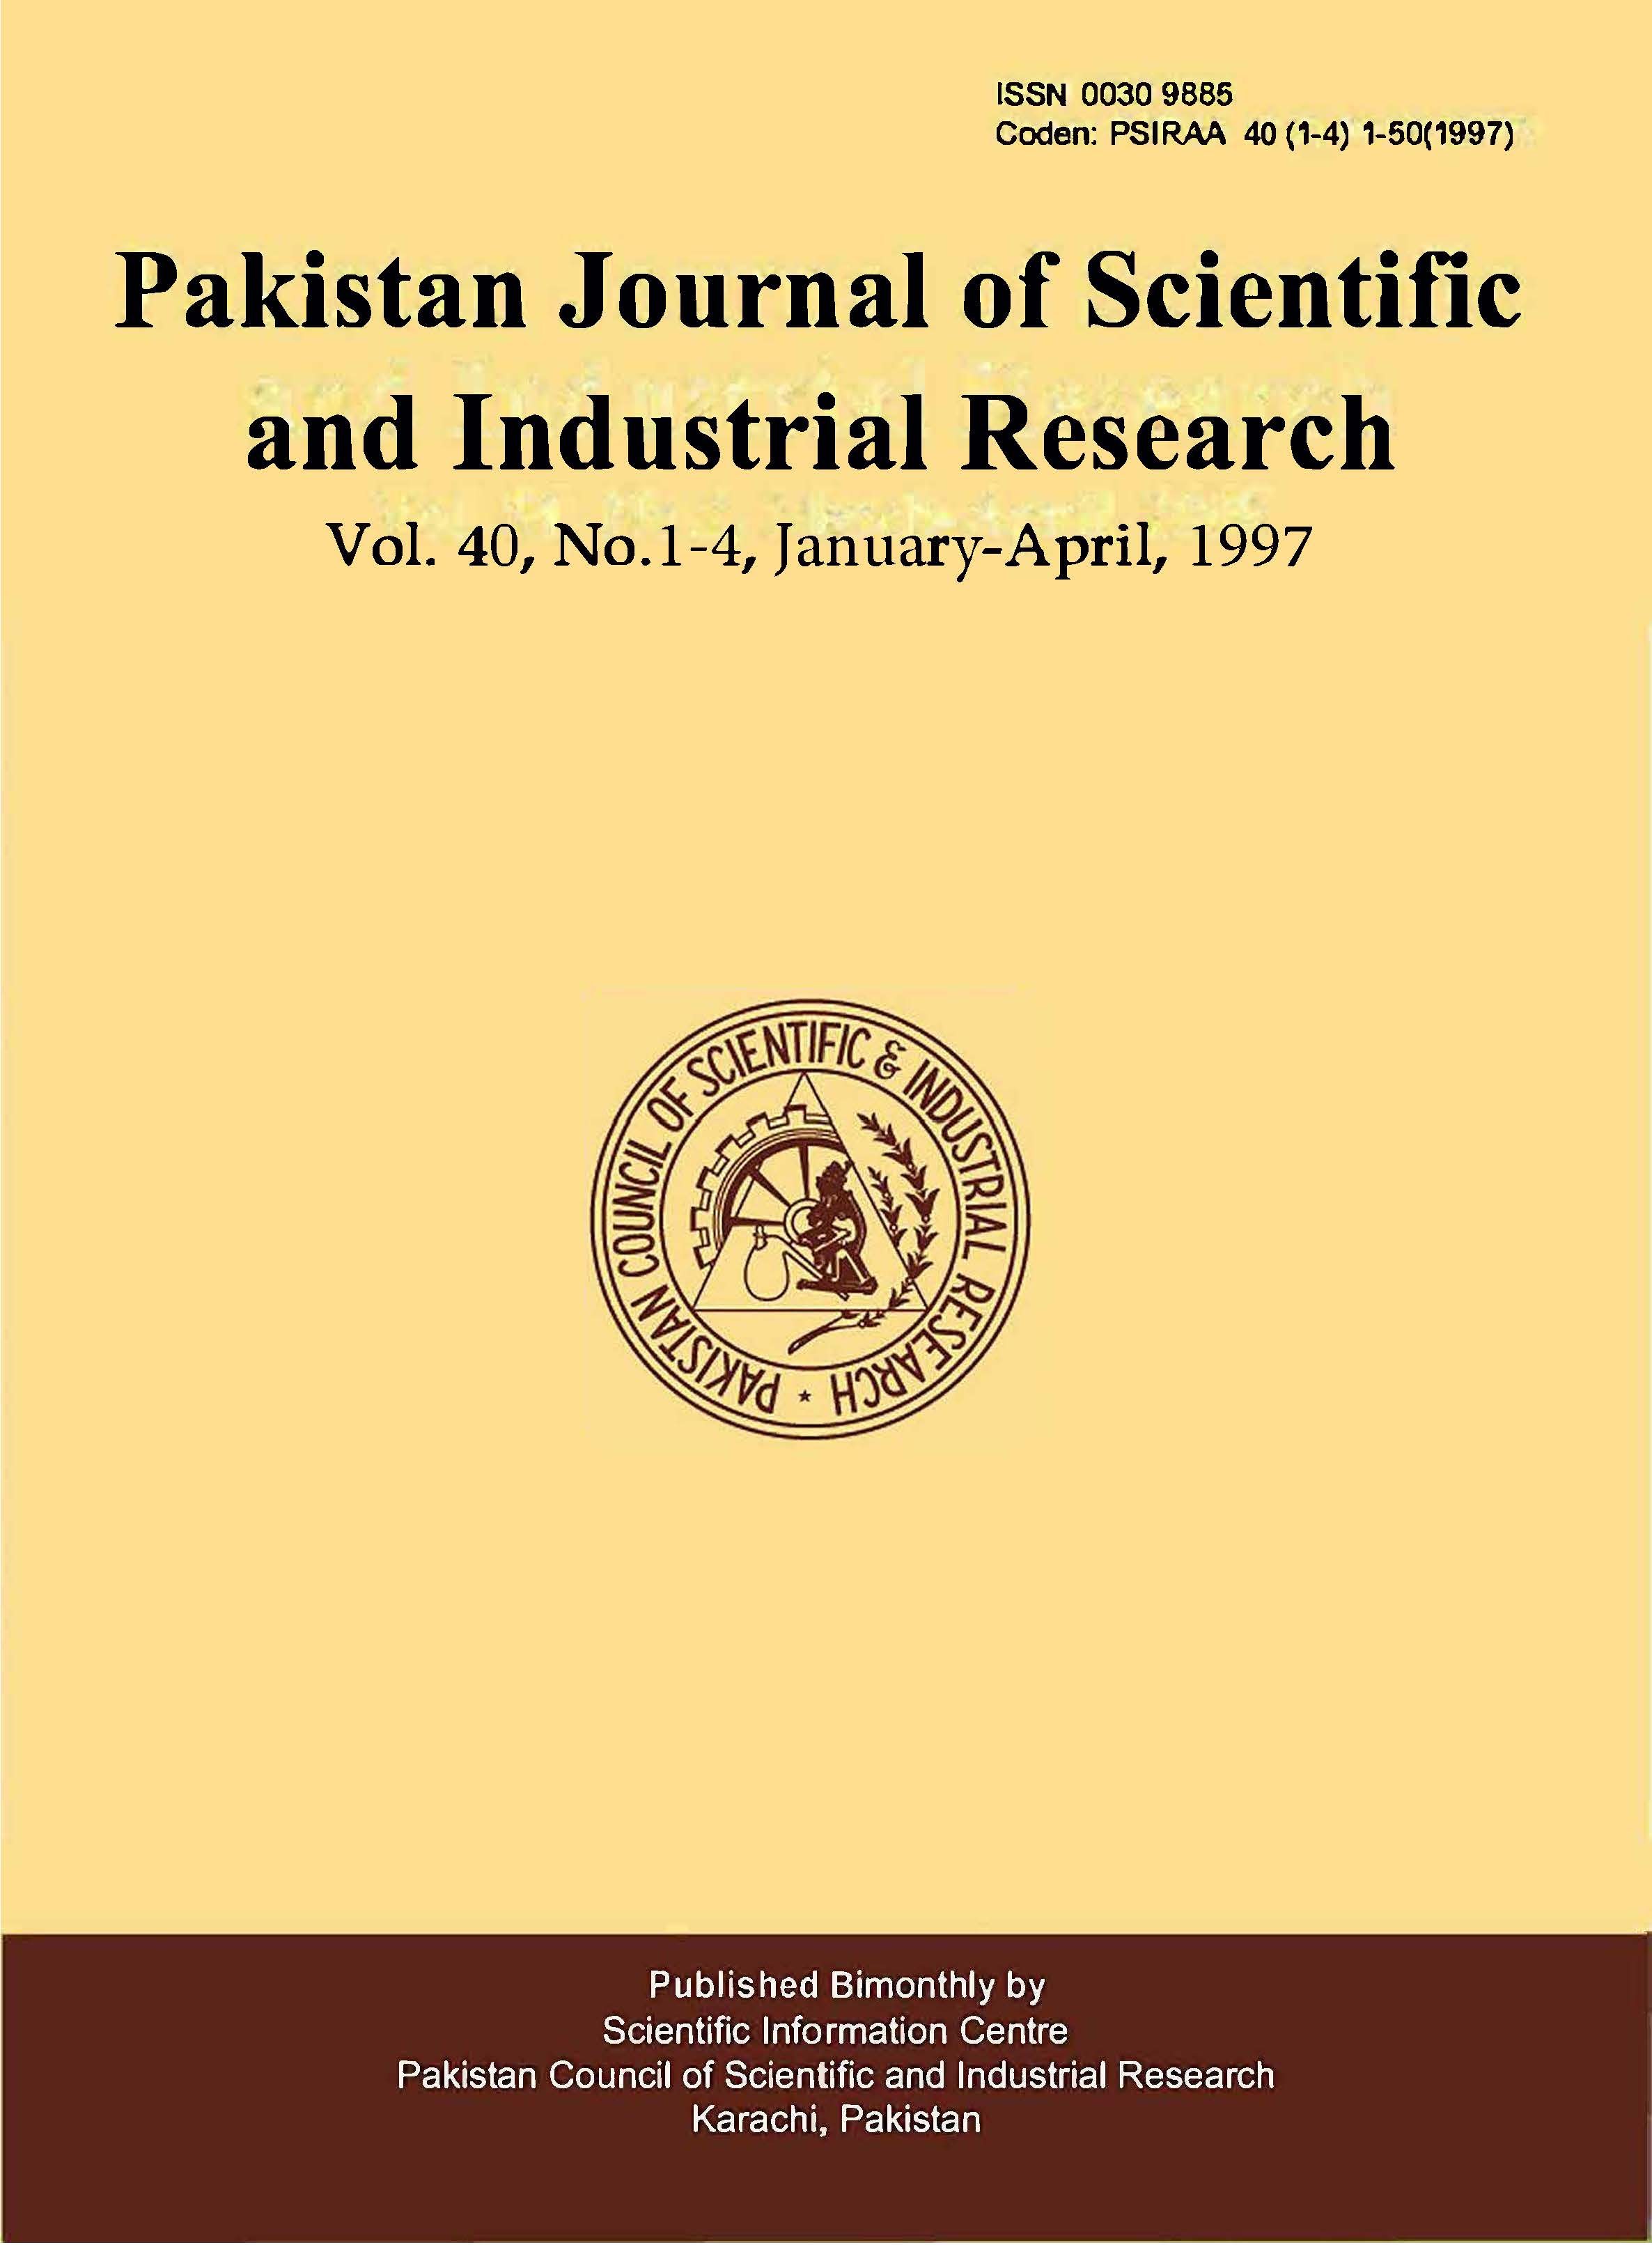 					View Vol. 40 No. 1-4 (1997): Pakistan Journal of Scientific and Industrial Research
				